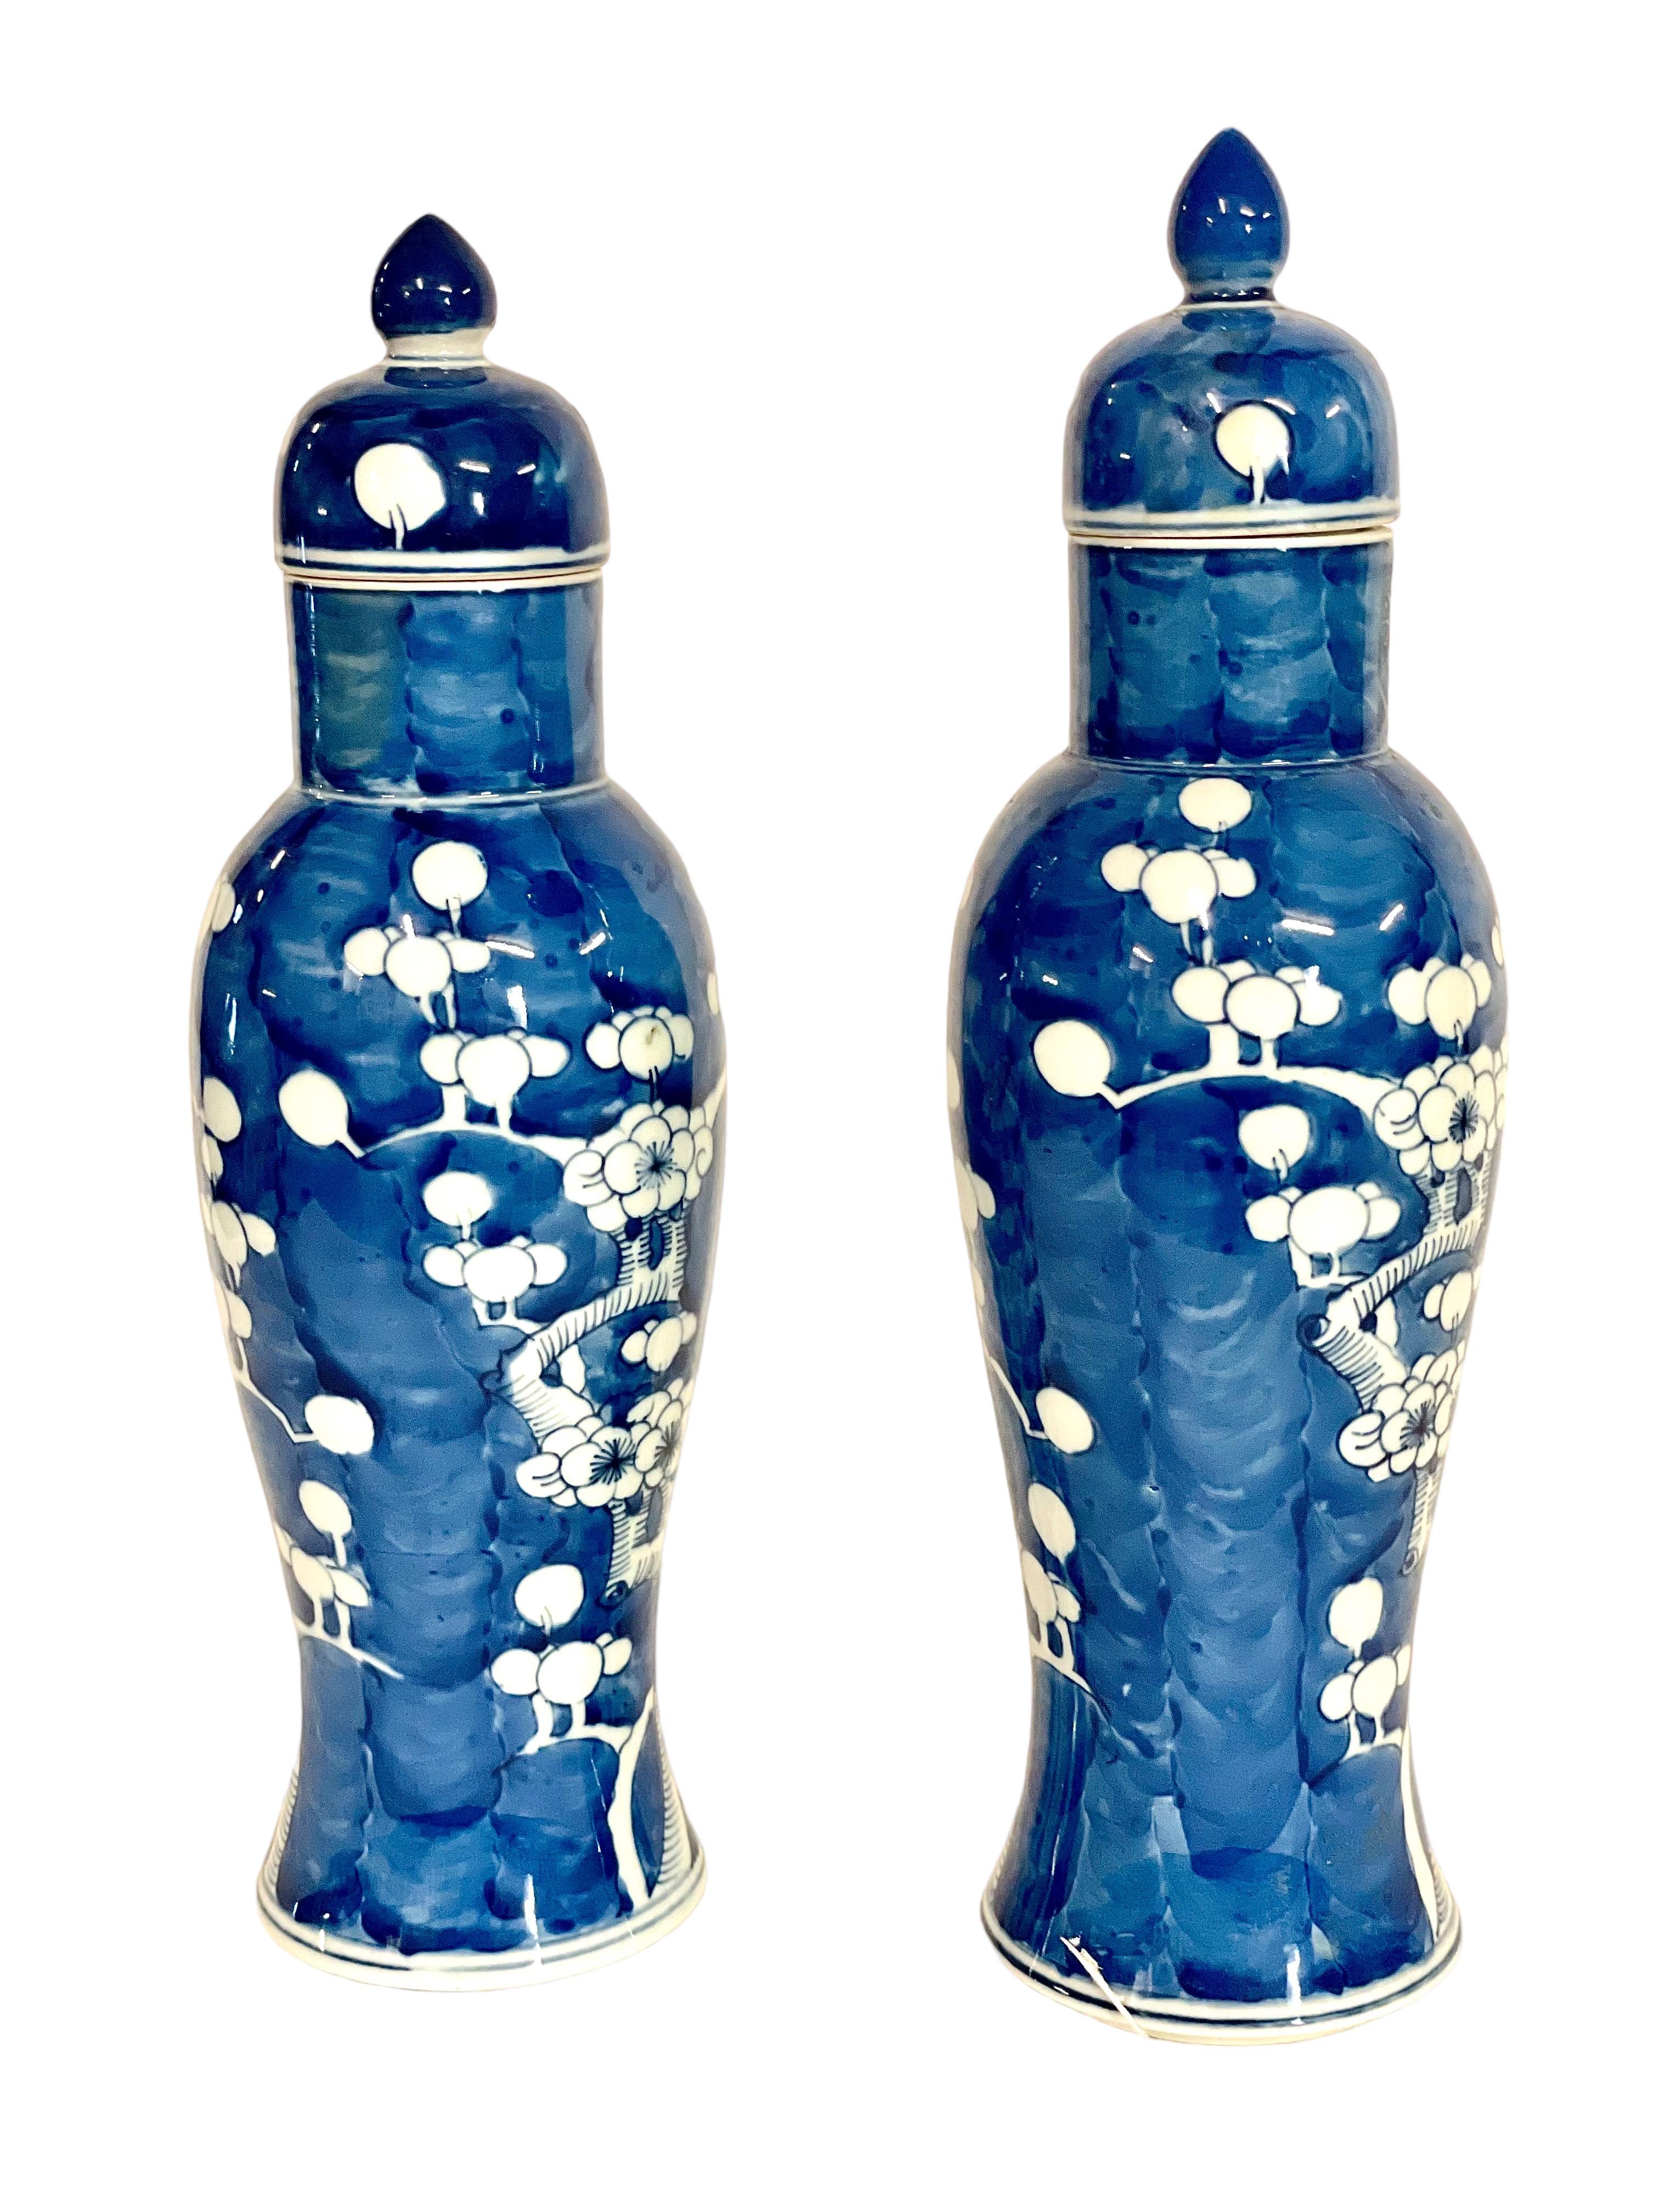 An exquisite pair of Chinese porcelain lidded vases, in baluster form and beautifully hand-painted with a traditional decoration of entwining branches of white blossoming prunus set against a deep blue background. The lids are close-fitting, with an